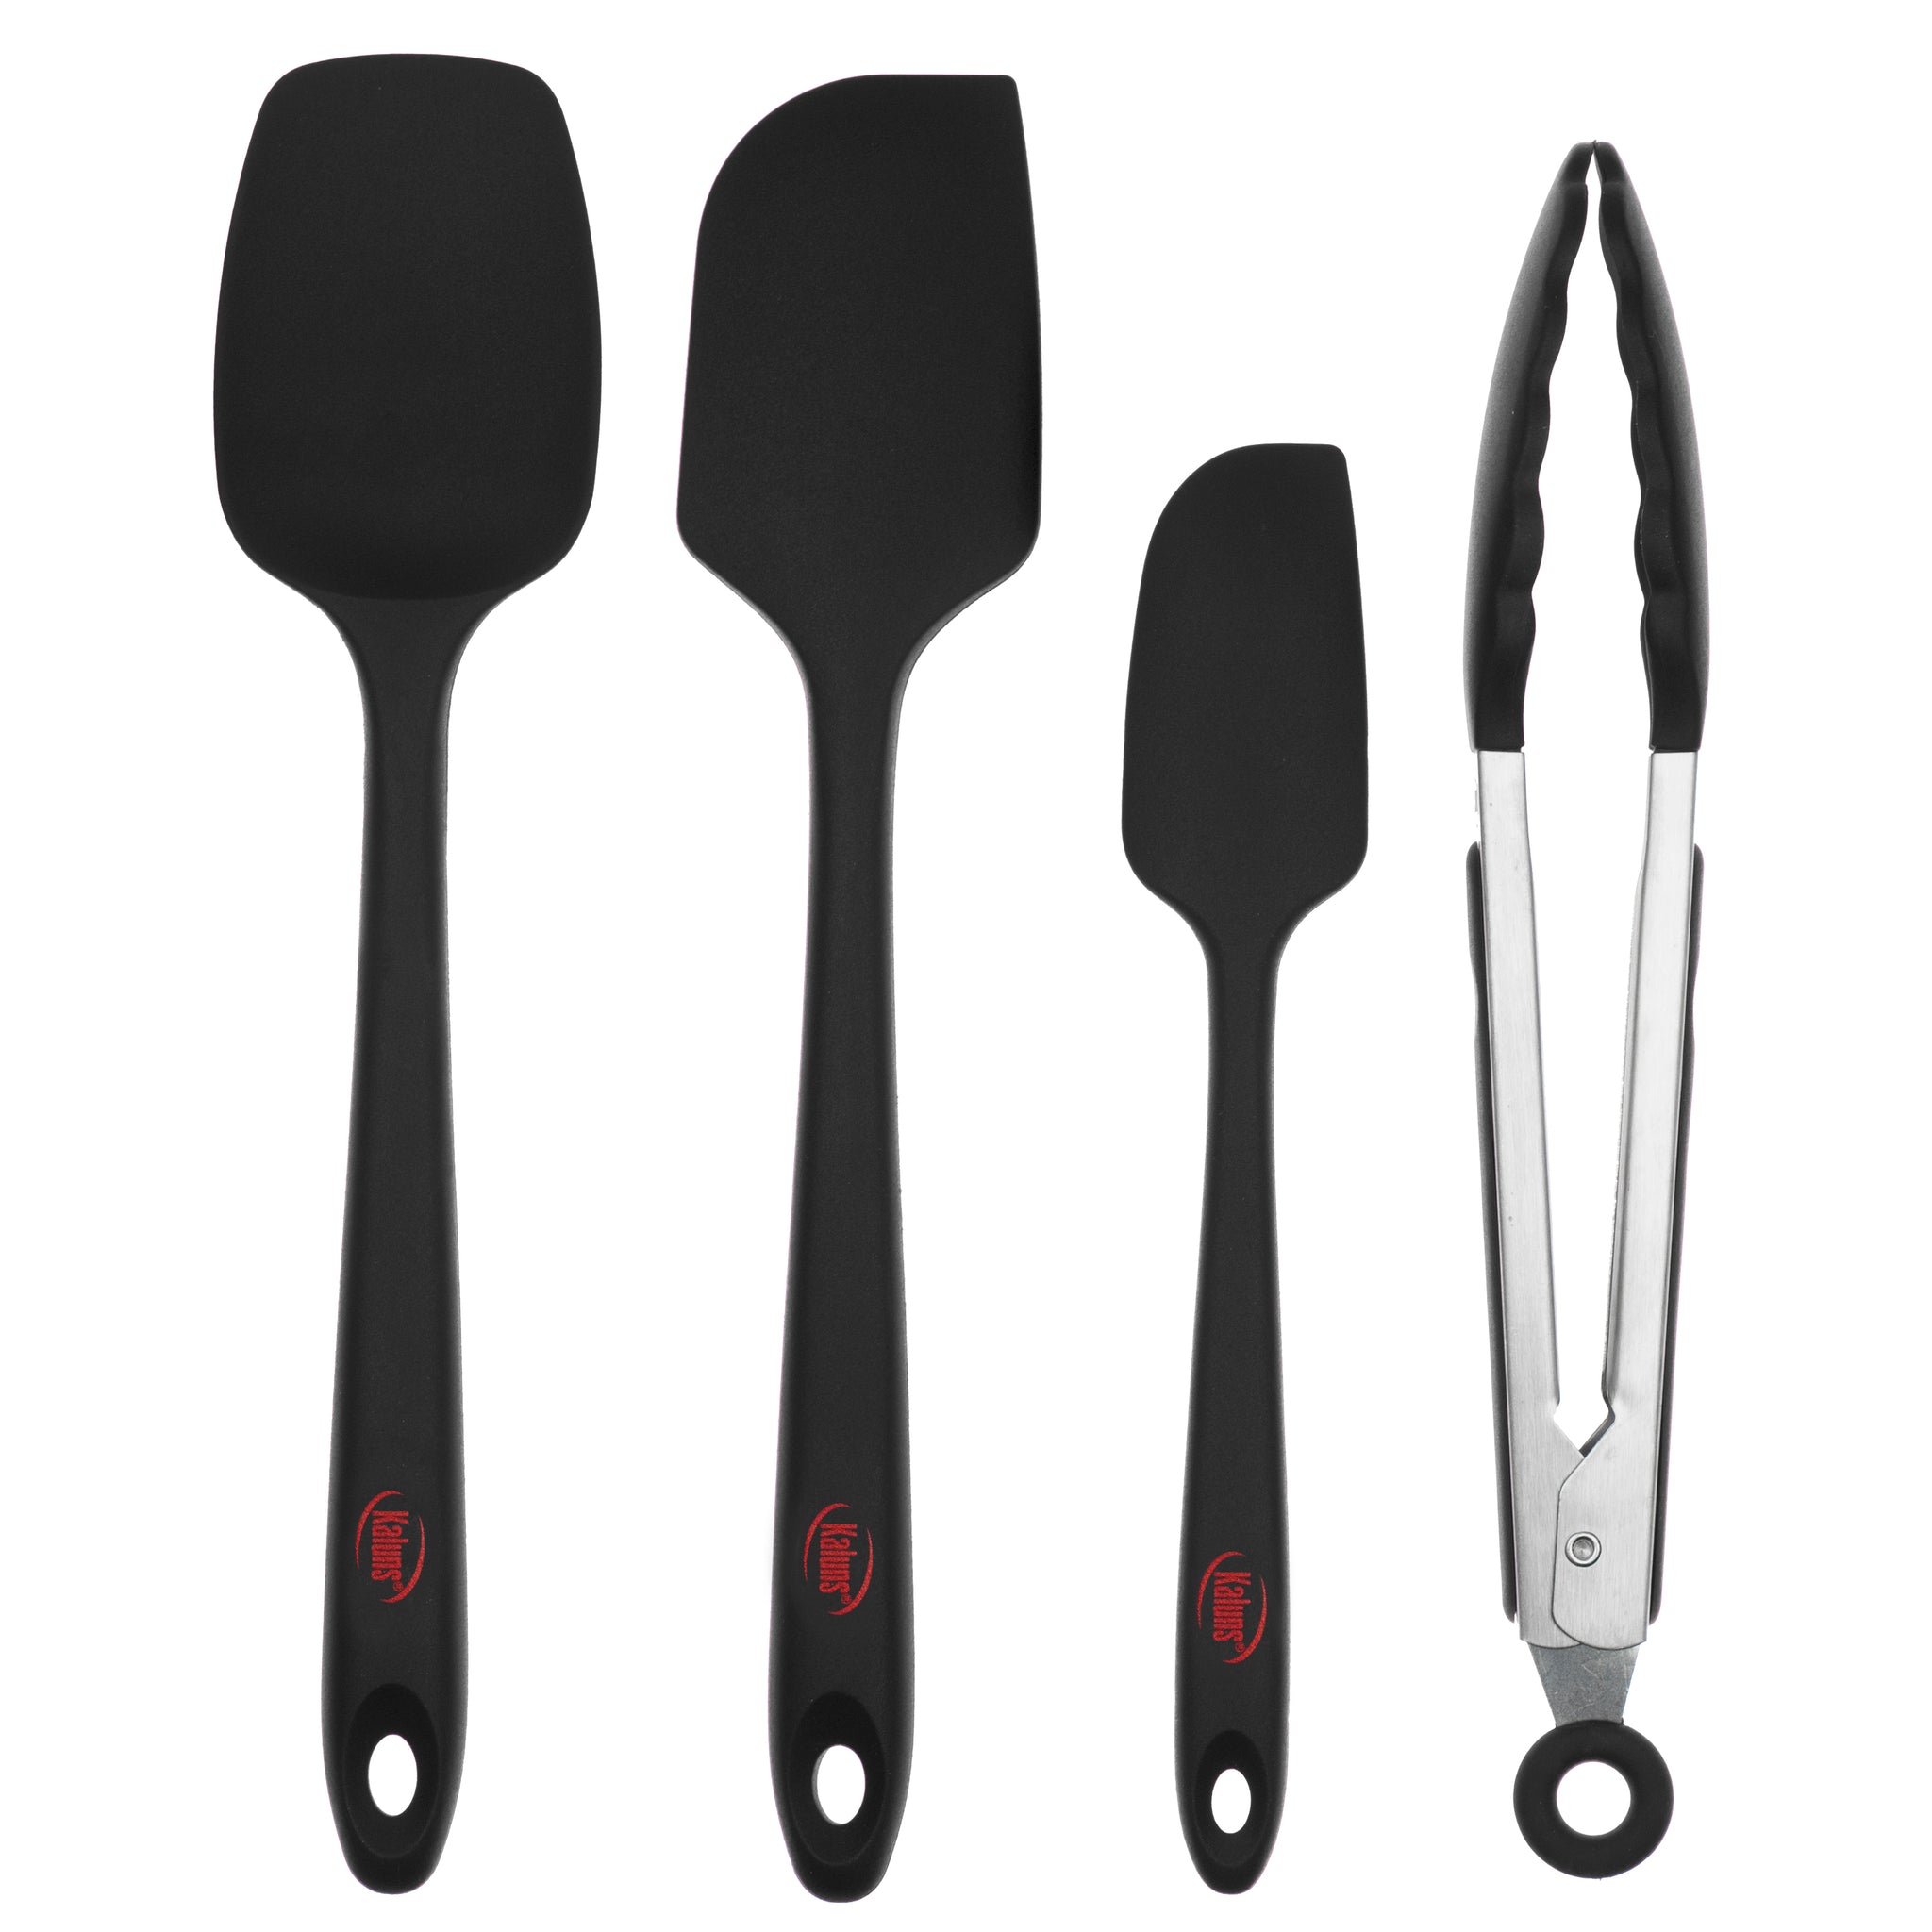 TEEVEA Silicone Rubber Spatula Heat Resistant for Kitchen Cooking, Baking  and Mixing Set of 4,Red & Black